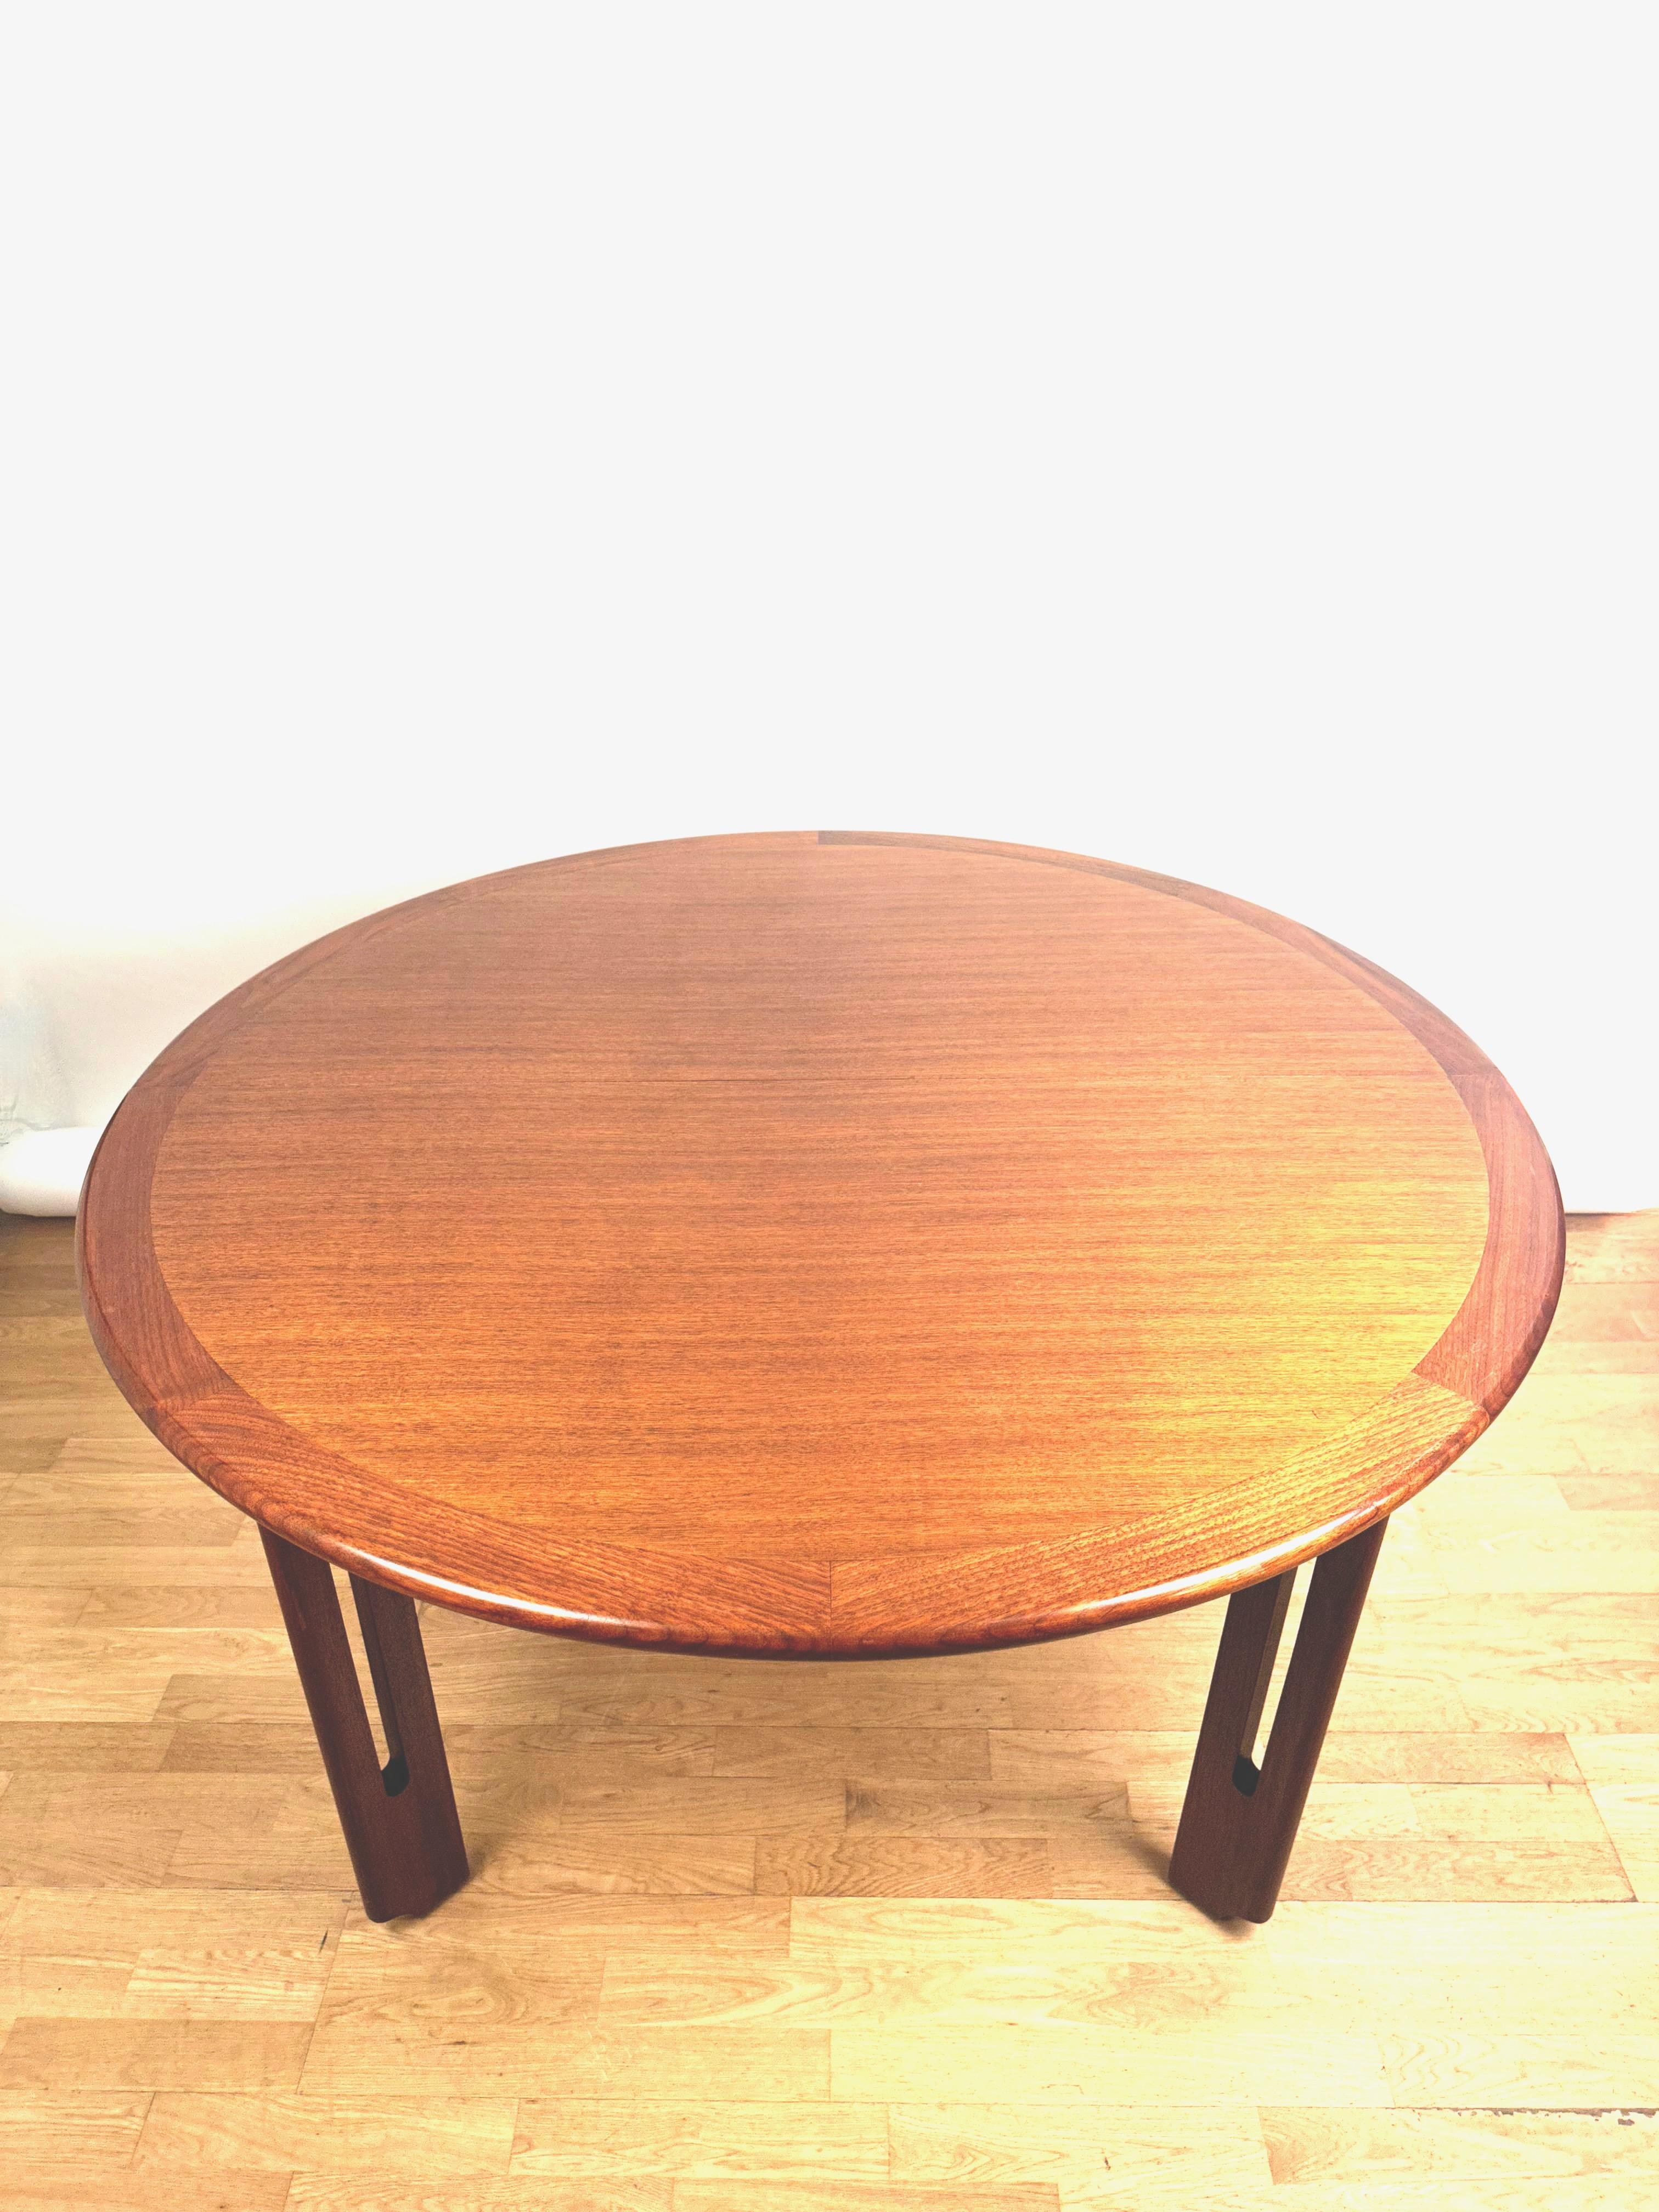 An elegant and raredining table designed by Giampiero Vitelli in the 1970s.Teak frame .Extensible:130cm-180 cm.Excellent condition.
Free professional packing is provided.